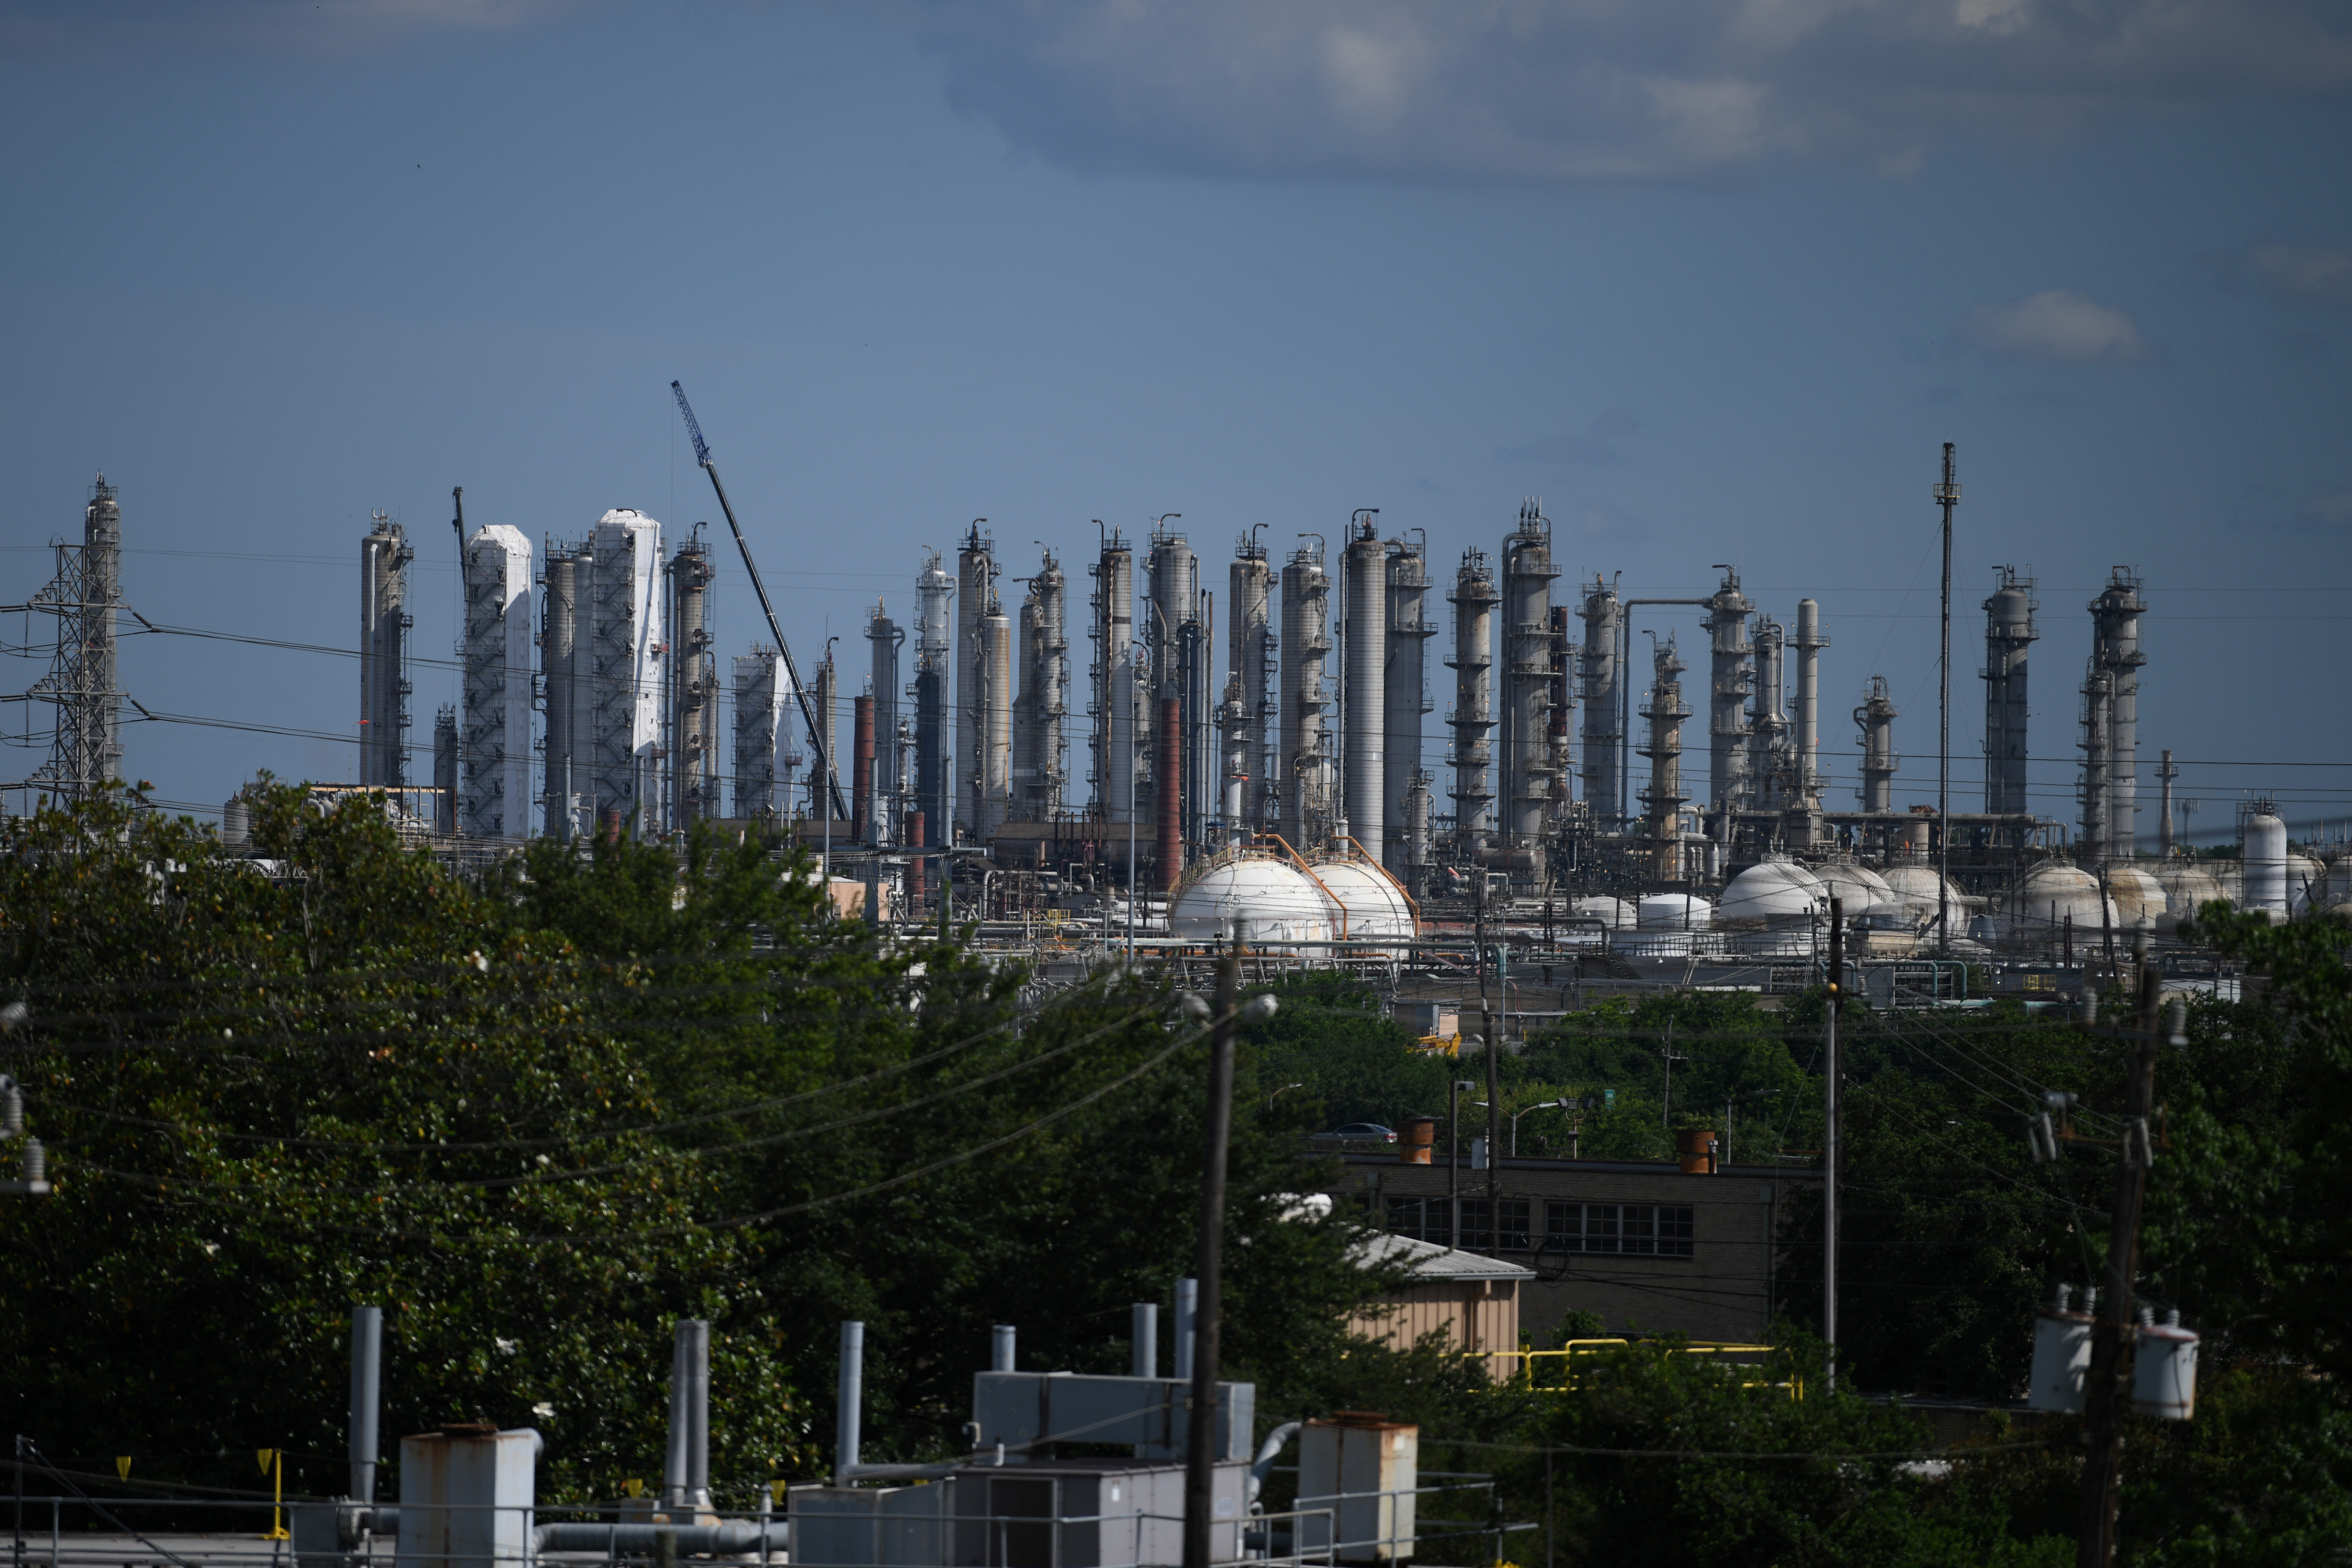 Refinery operations near the Houston Ship Channel are seen in Houston